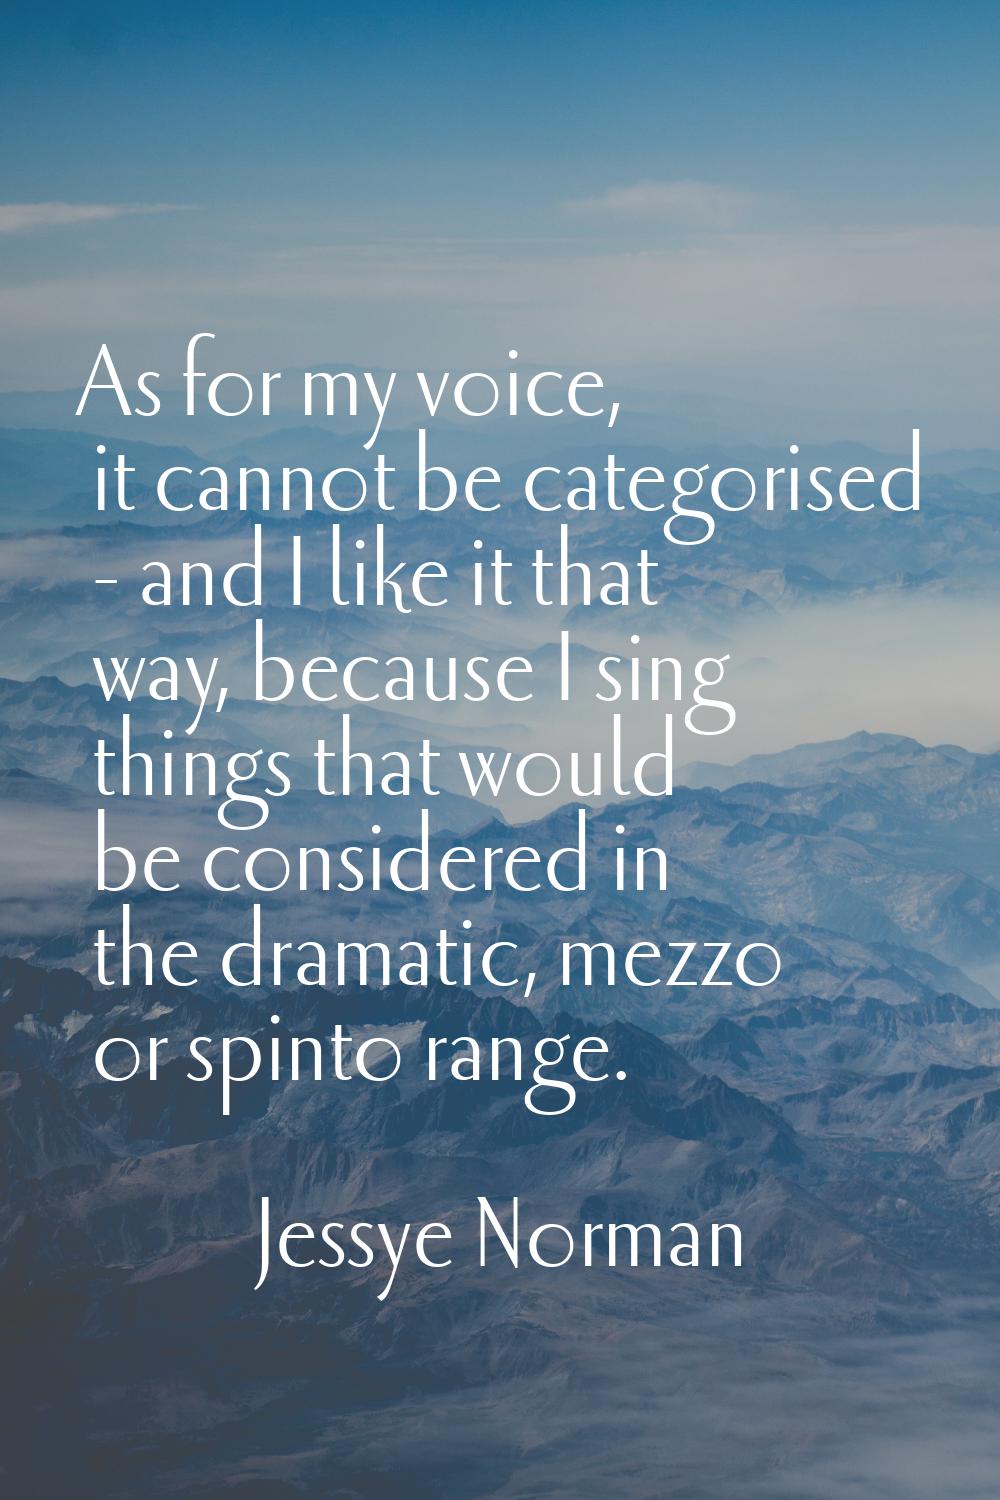 As for my voice, it cannot be categorised - and I like it that way, because I sing things that woul